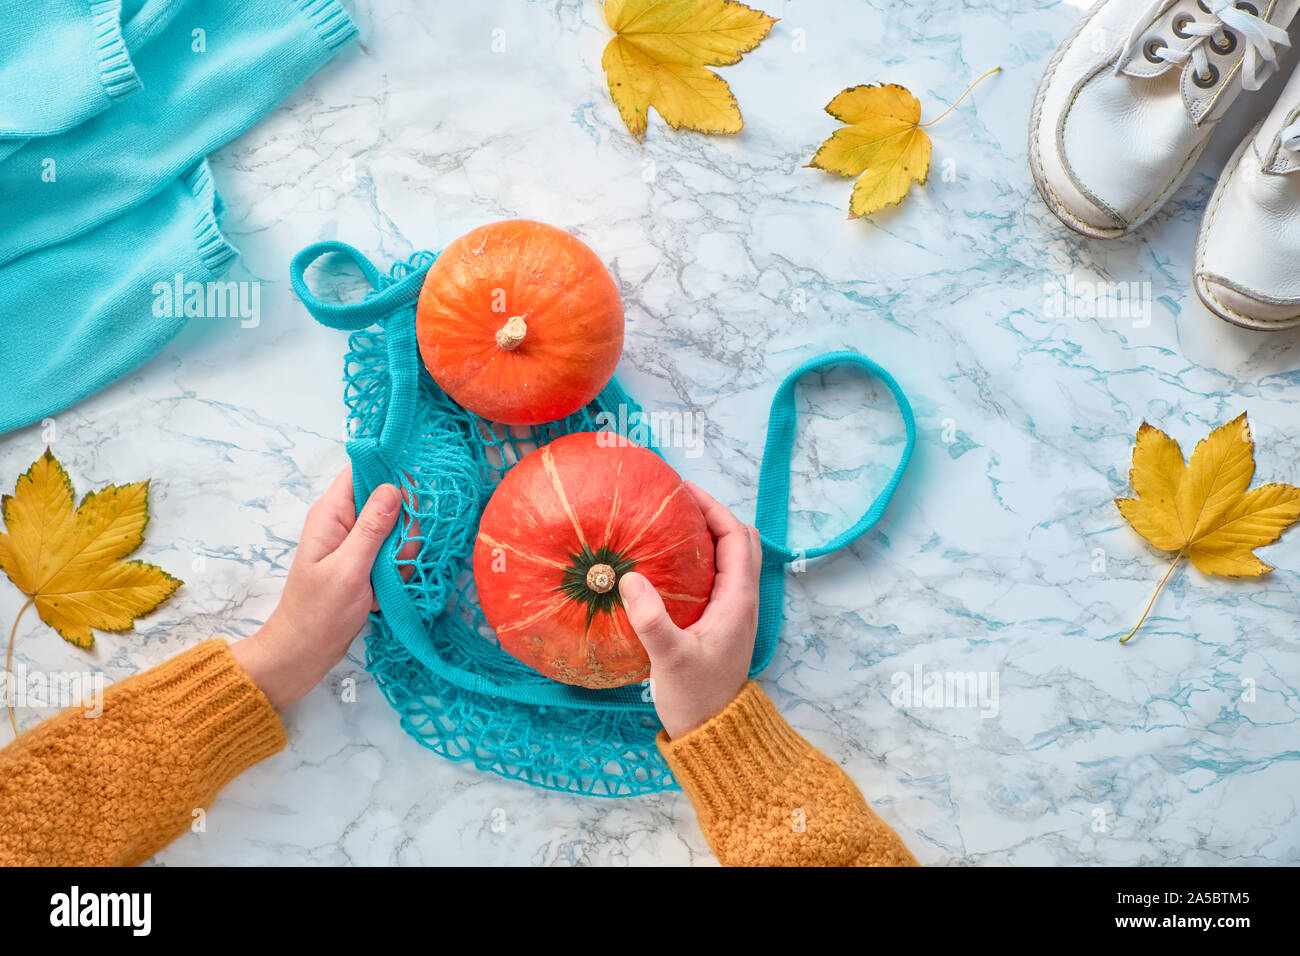 Autumn flat lay with female hands putting orange pumpkin into turquoise mesh bag. Top view on light marble background with white shoes, sweater and ye Stock Photo